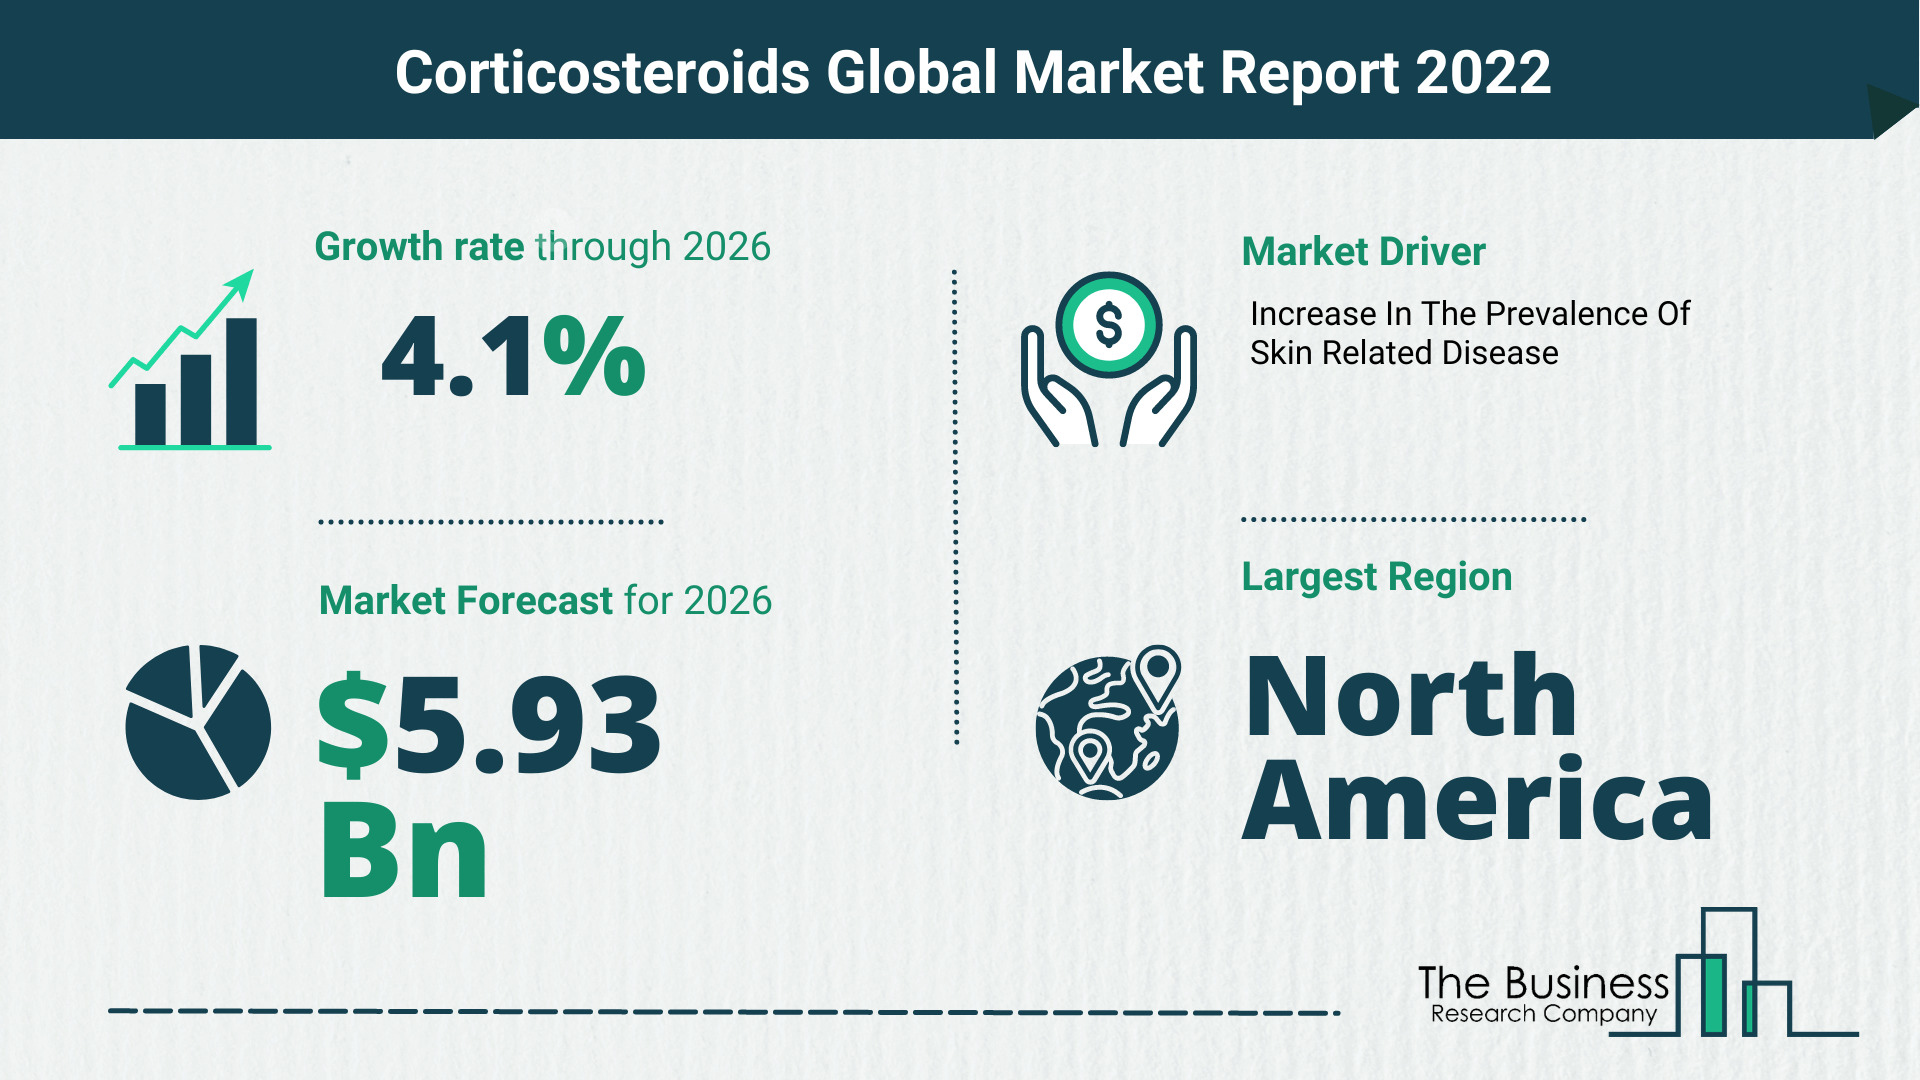 Global Corticosteroids Market 2022 – Market Opportunities And Strategies